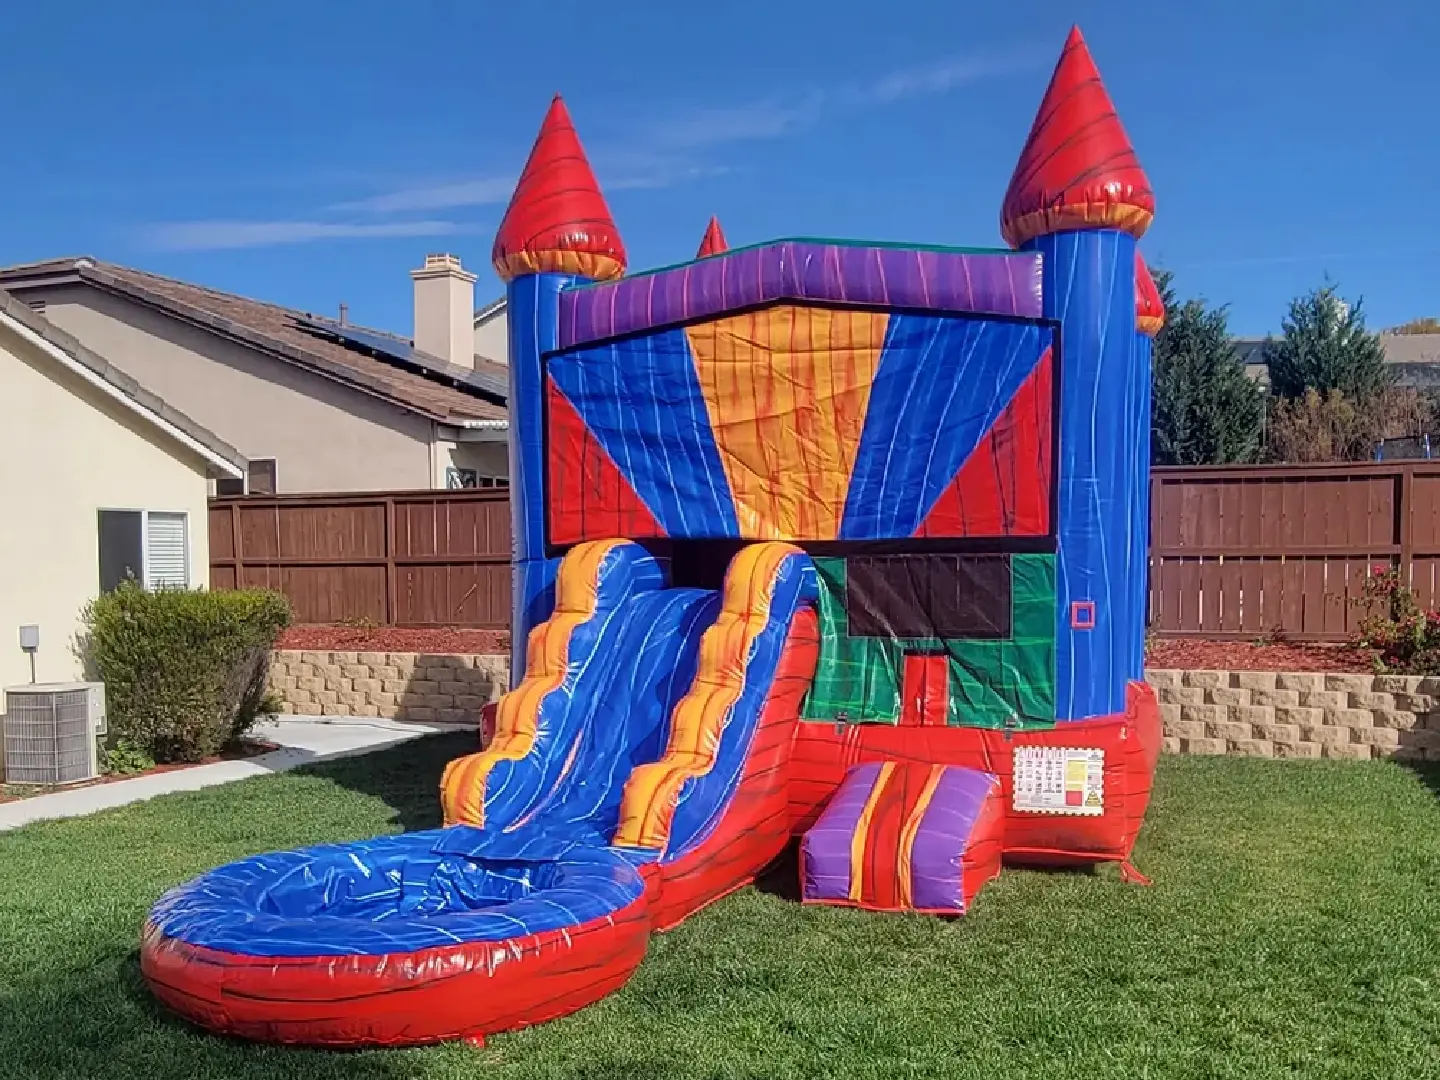 A red, blue and yellow inflatable castle with water slide.